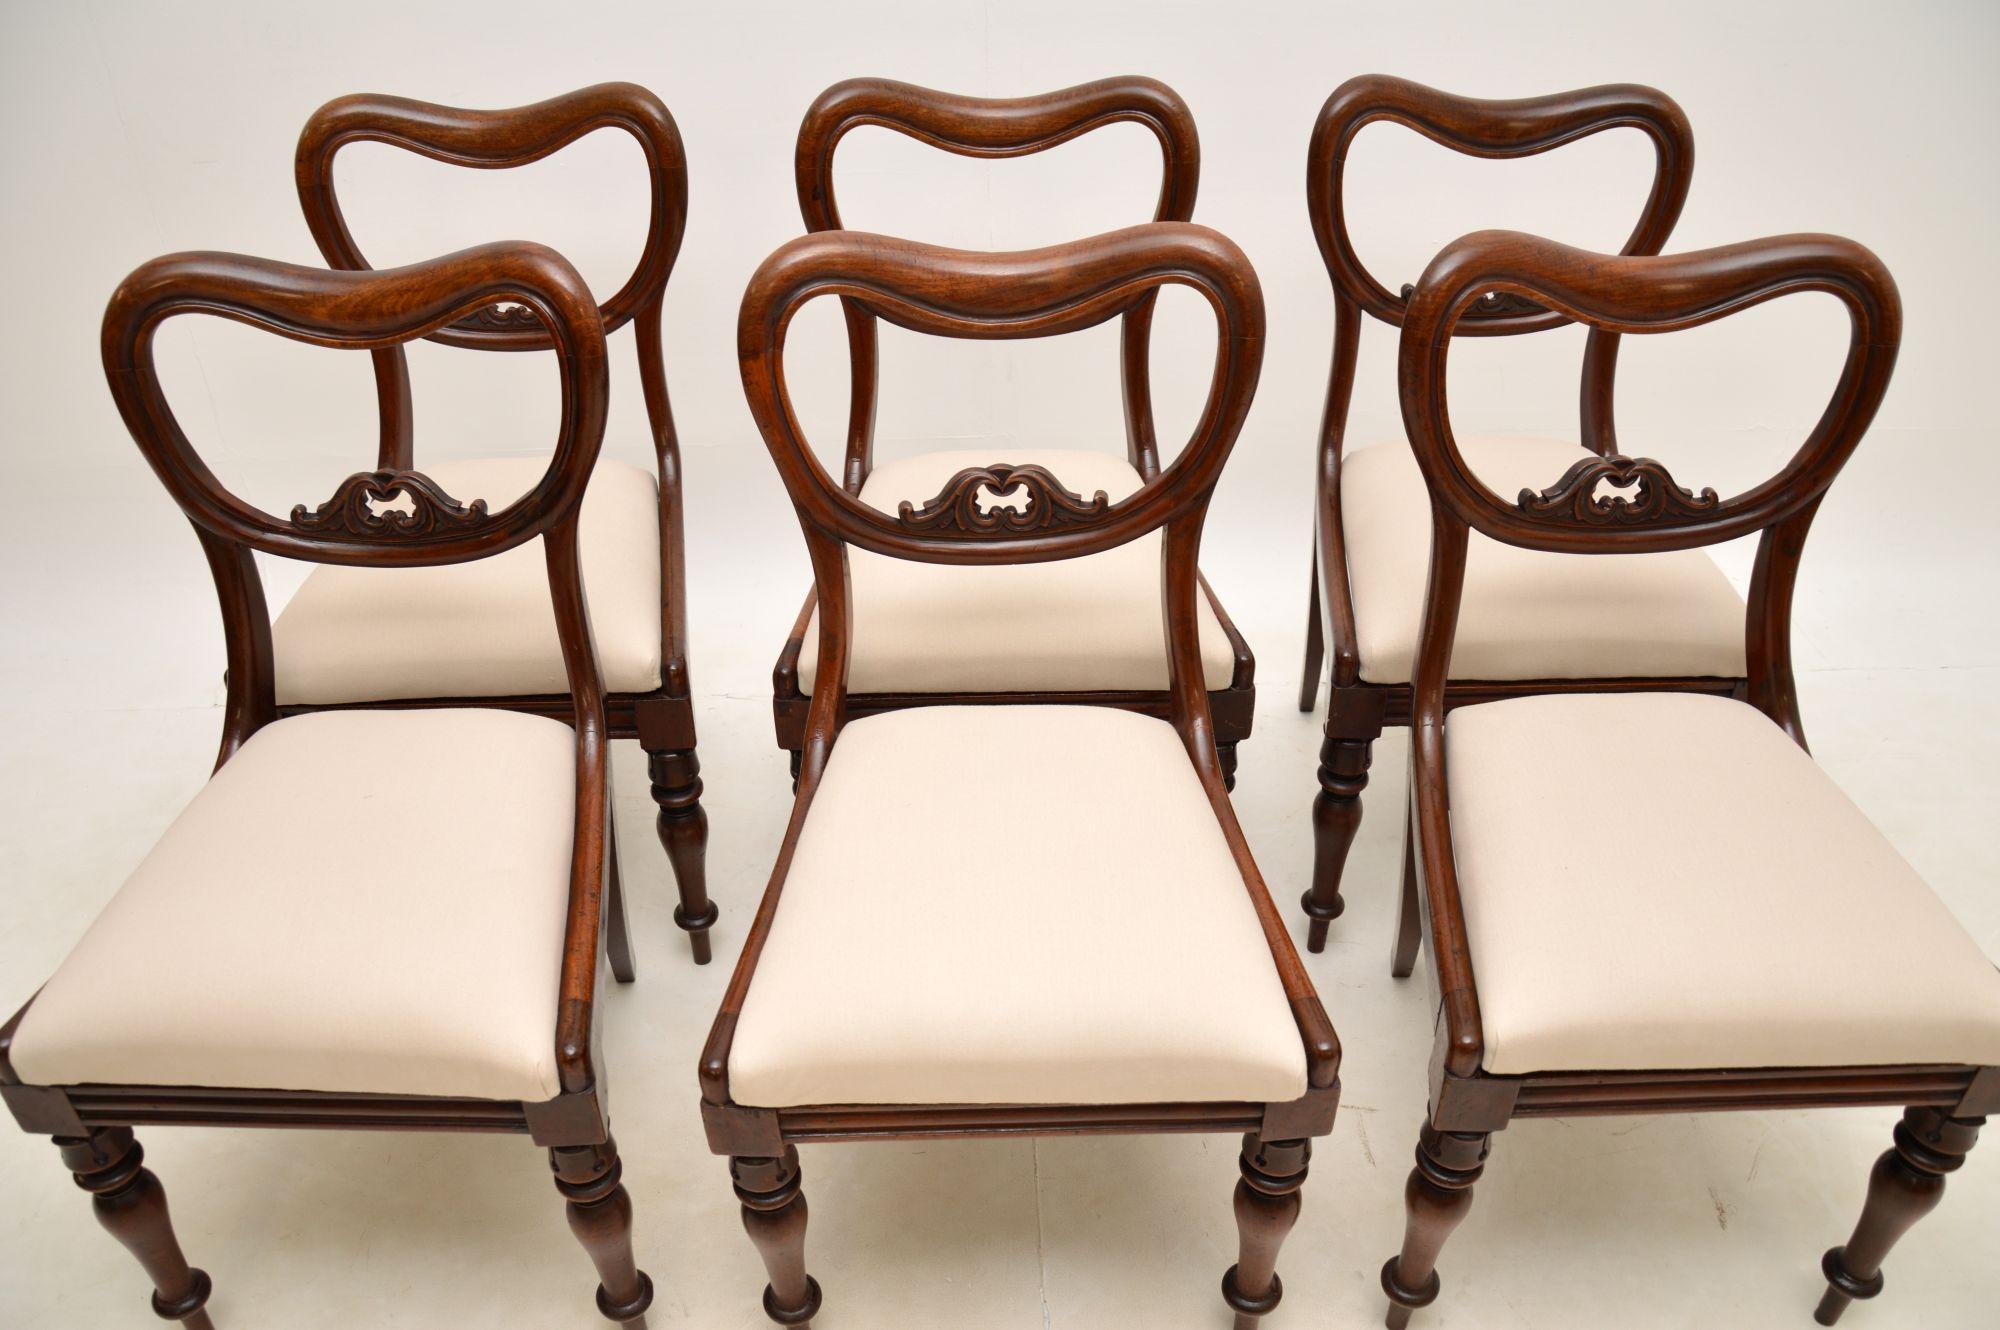 A stunning set of six original William IV period dining chairs. They were made in England, and date from around the 1830-1840’s.

The quality is superb, they have beautifully carved pierced ‘balloon’ backs, with sabre shaped back legs and nicely